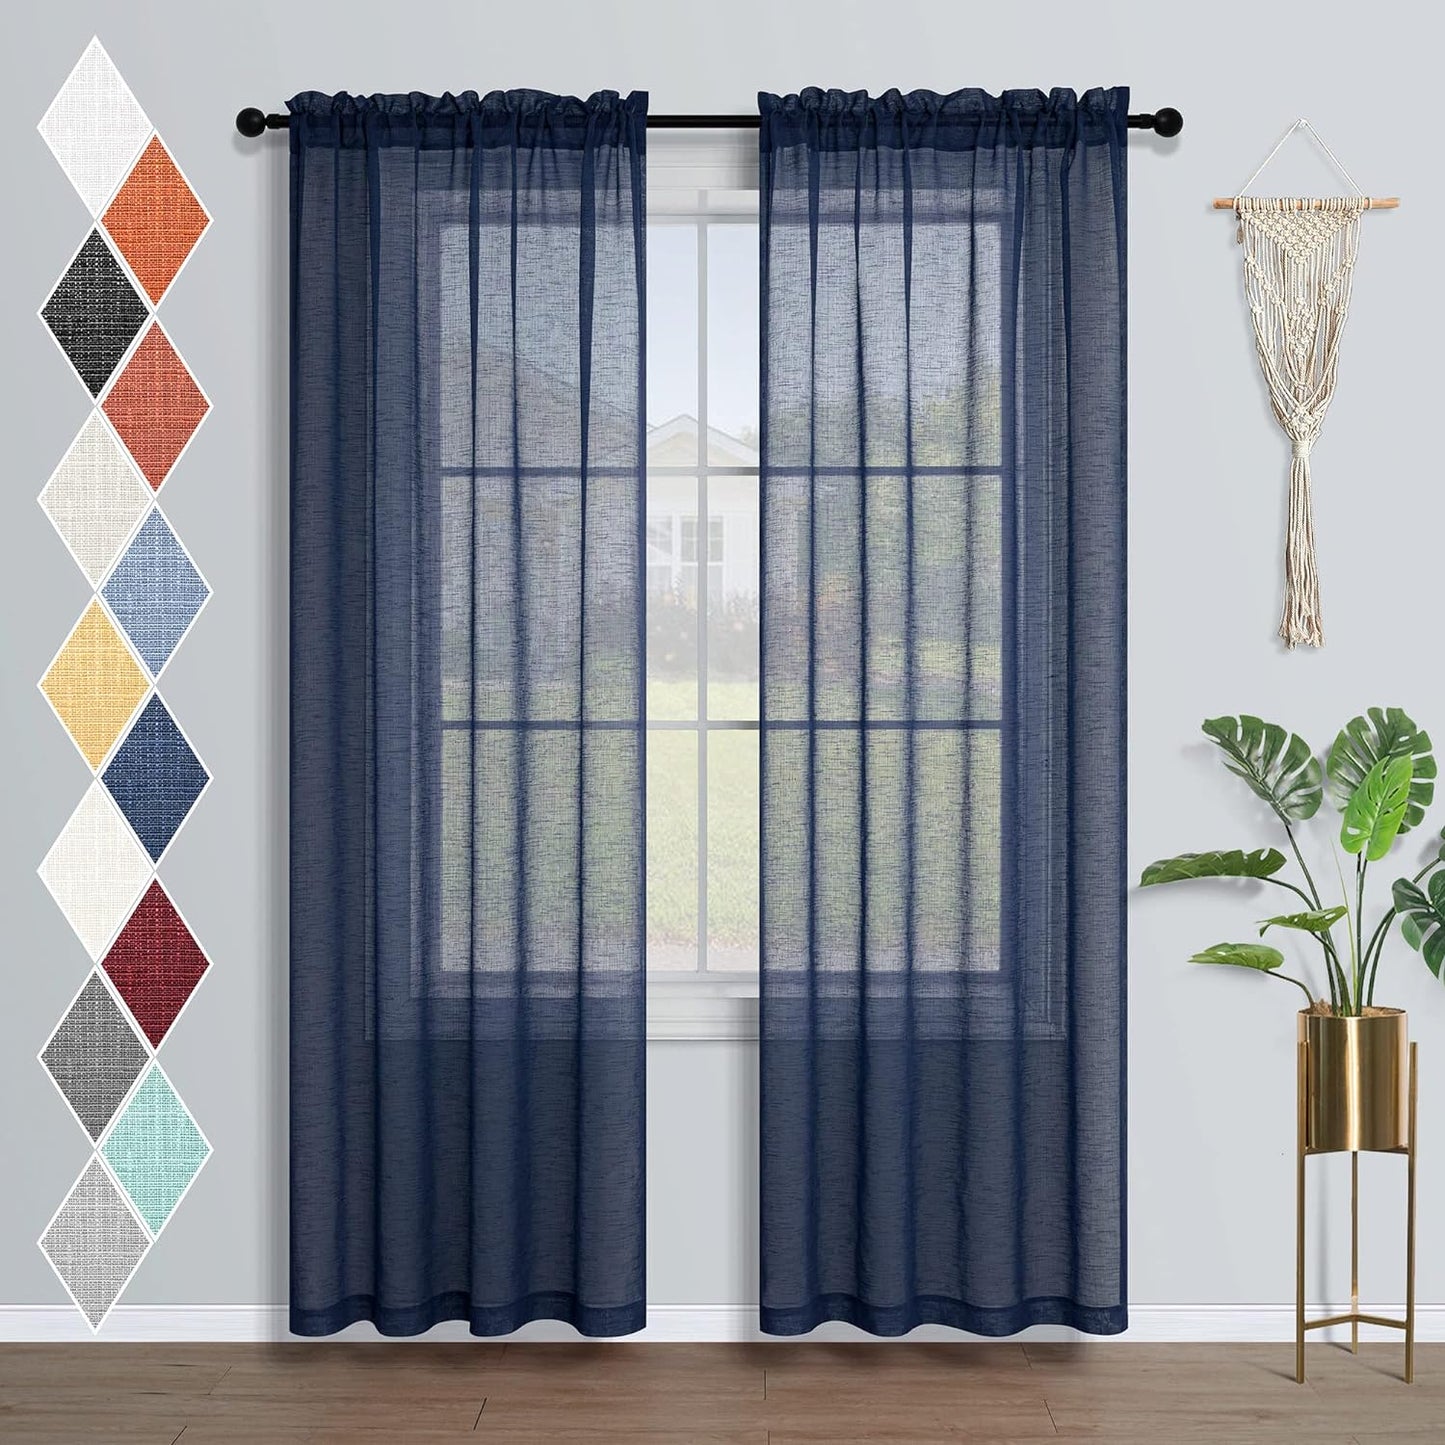 Burnt Orange Sheer Curtains 84 Inch Length for Bedroom 2 Panels Pumpkin Thanksgiving Day Rod Pocket Bohemian Semi Sheer Curtain Rustic Light Filtering Boho Curtains for Living Room 84 Inches Long  MRS.NATURALL TEXTILE Navy Blue 38X84 